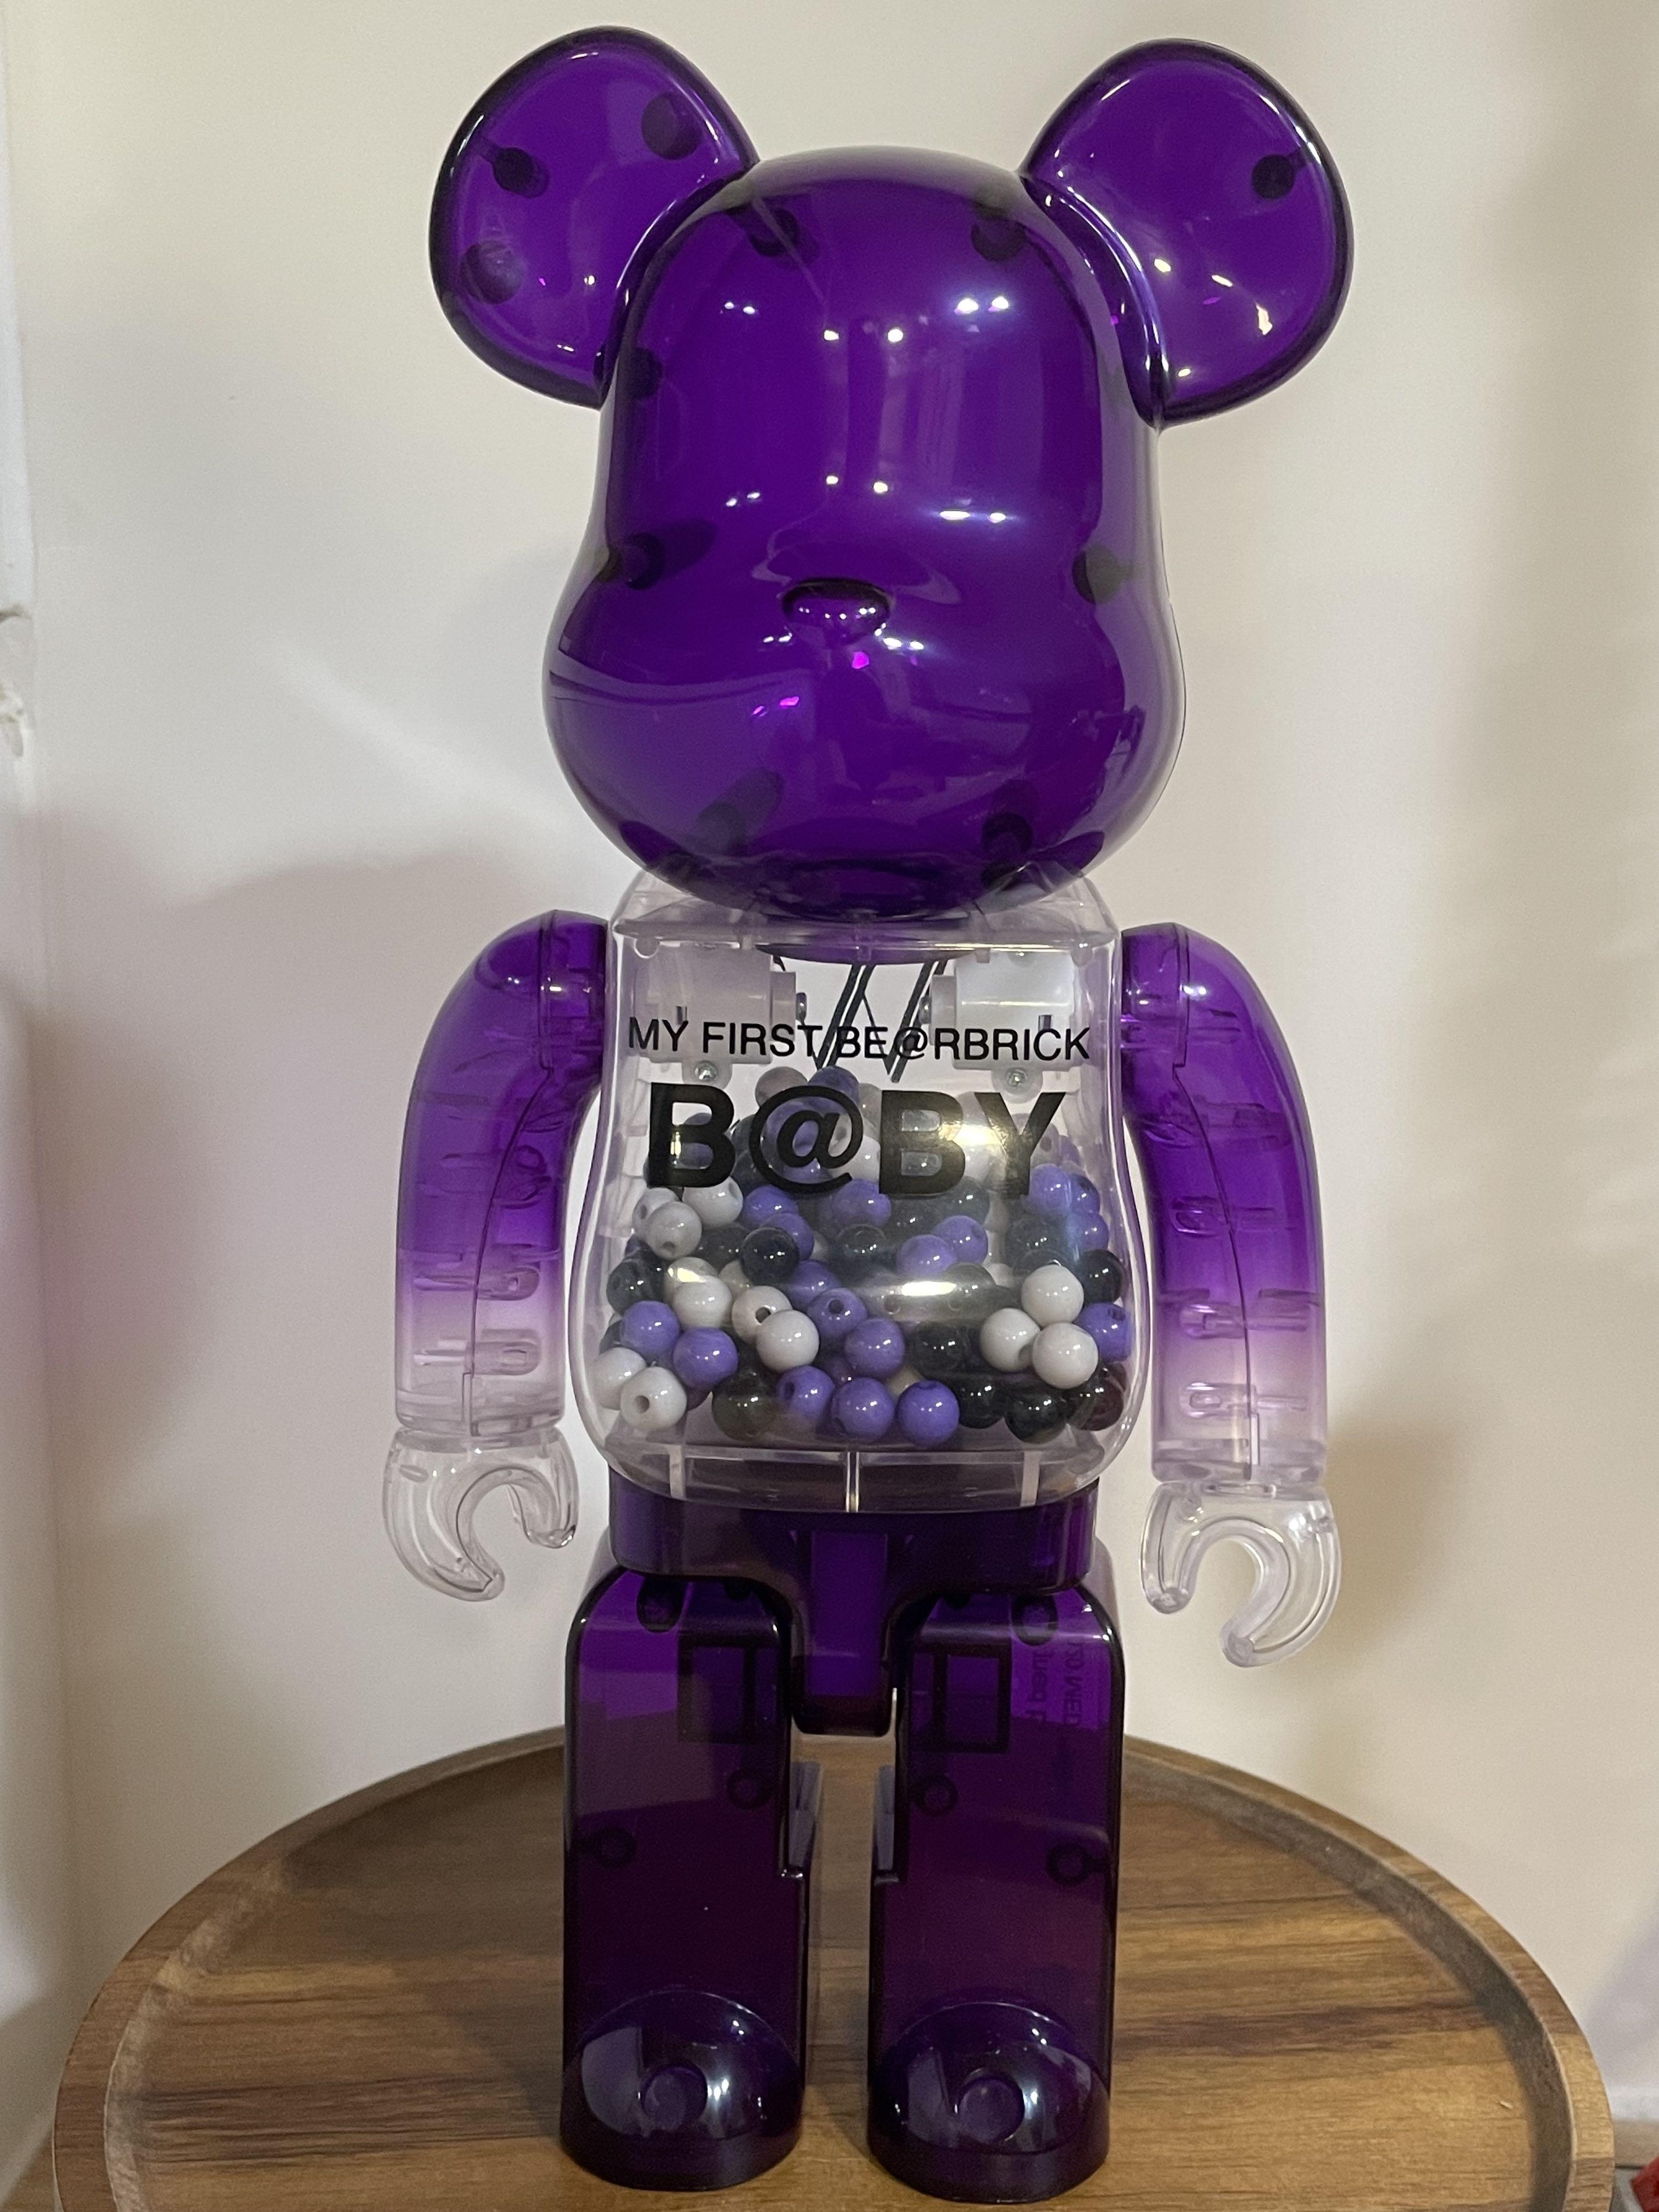 MY FIRST BE@RBRICK B@BY MACAU2020100%400%セットです - その他